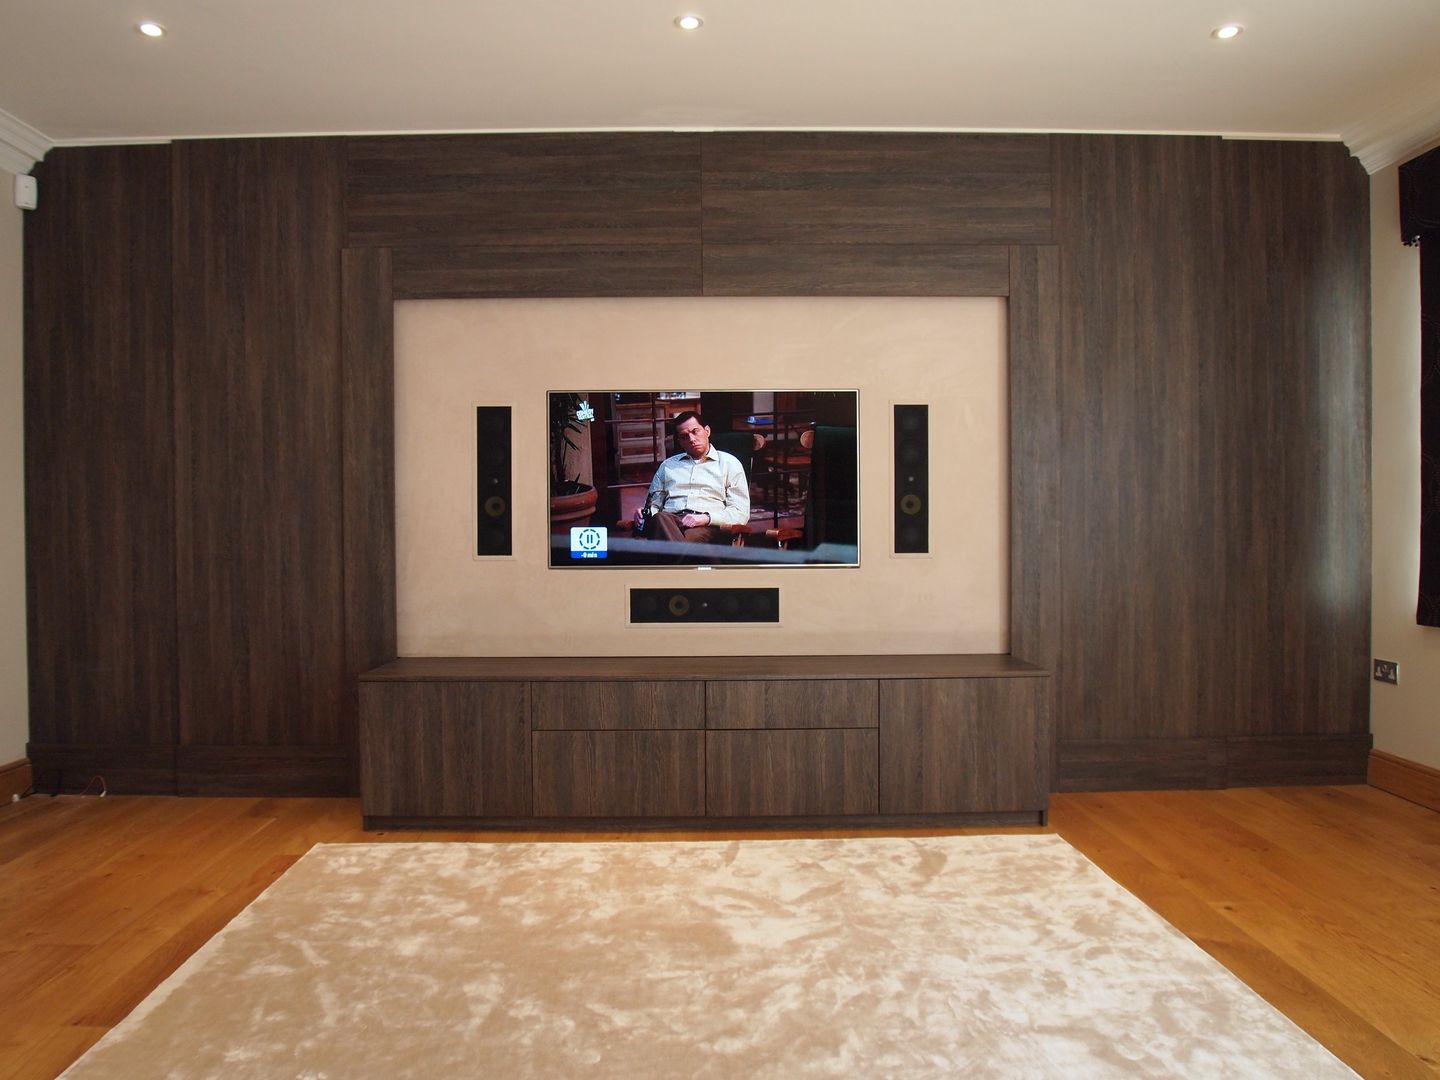 Dual purpose audio visual media unit with concealed 9 feet cinema screen and wood panelled walls. Designer Vision and Sound: Bespoke Cabinet Making Sala multimediale moderna Mobili